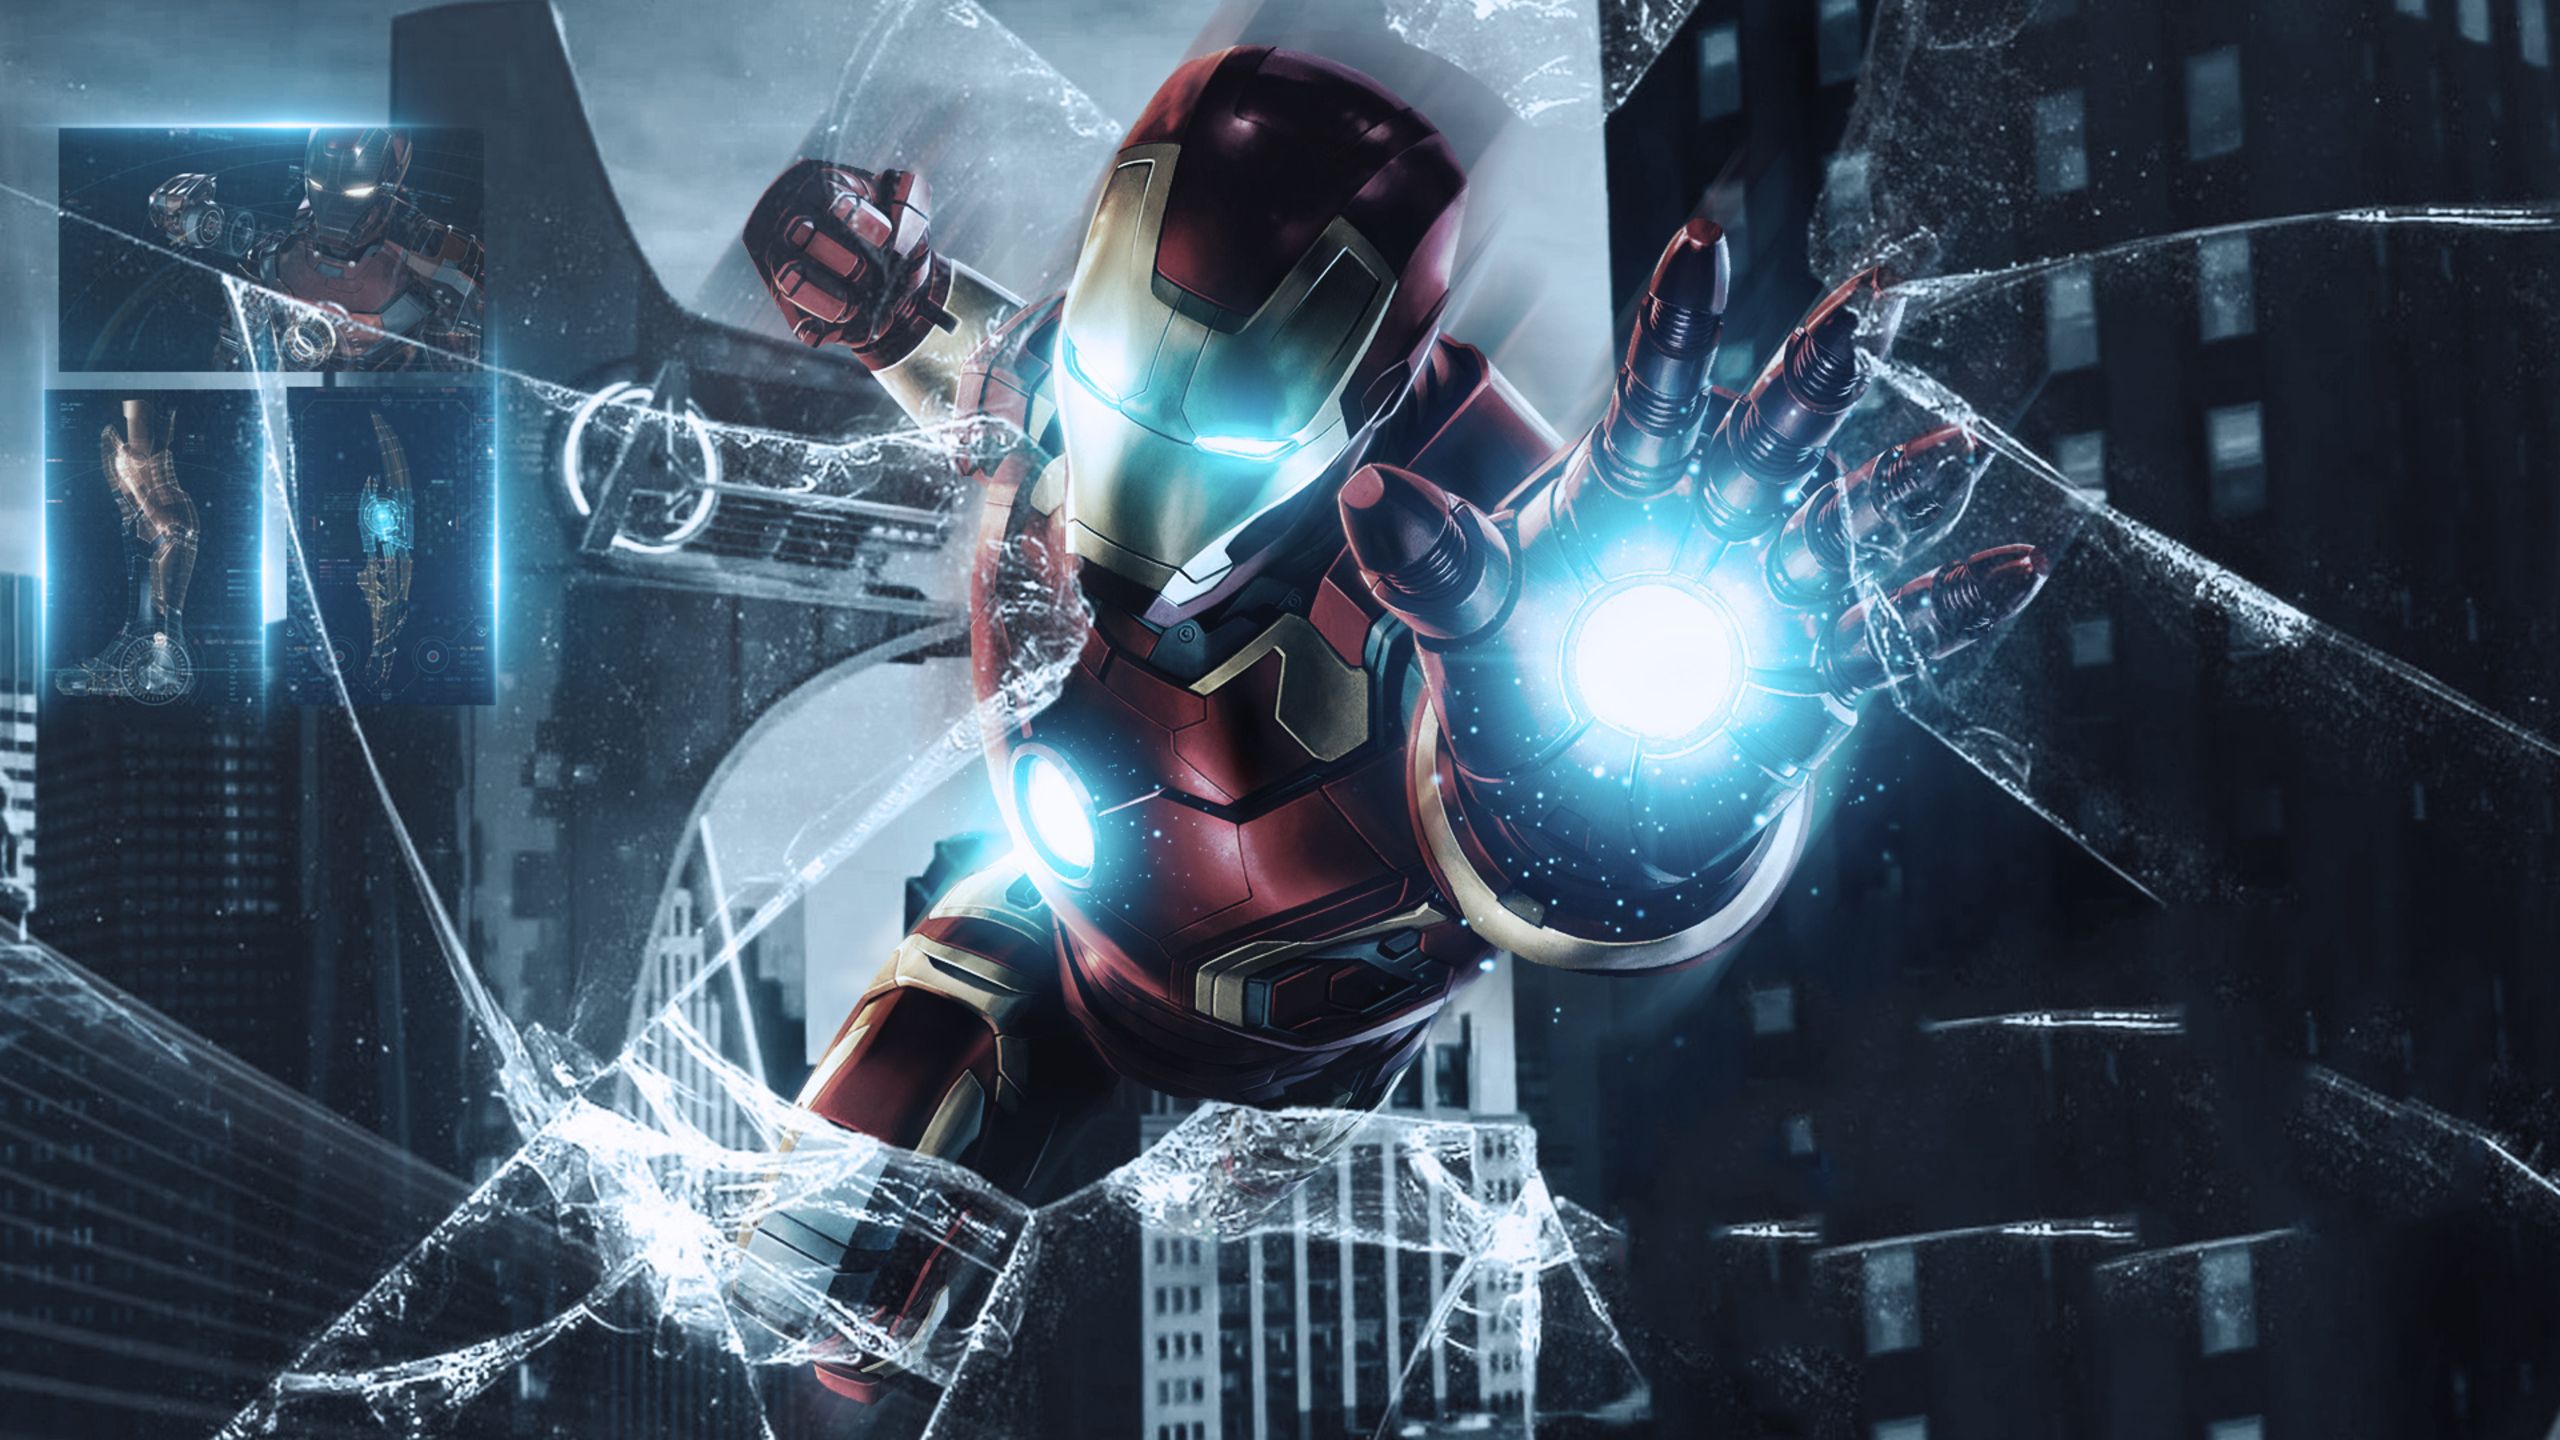 Iron Man Avengers Endgame Poster 1440P Resolution HD 4k Wallpaper, Image, Background, Photo and Picture